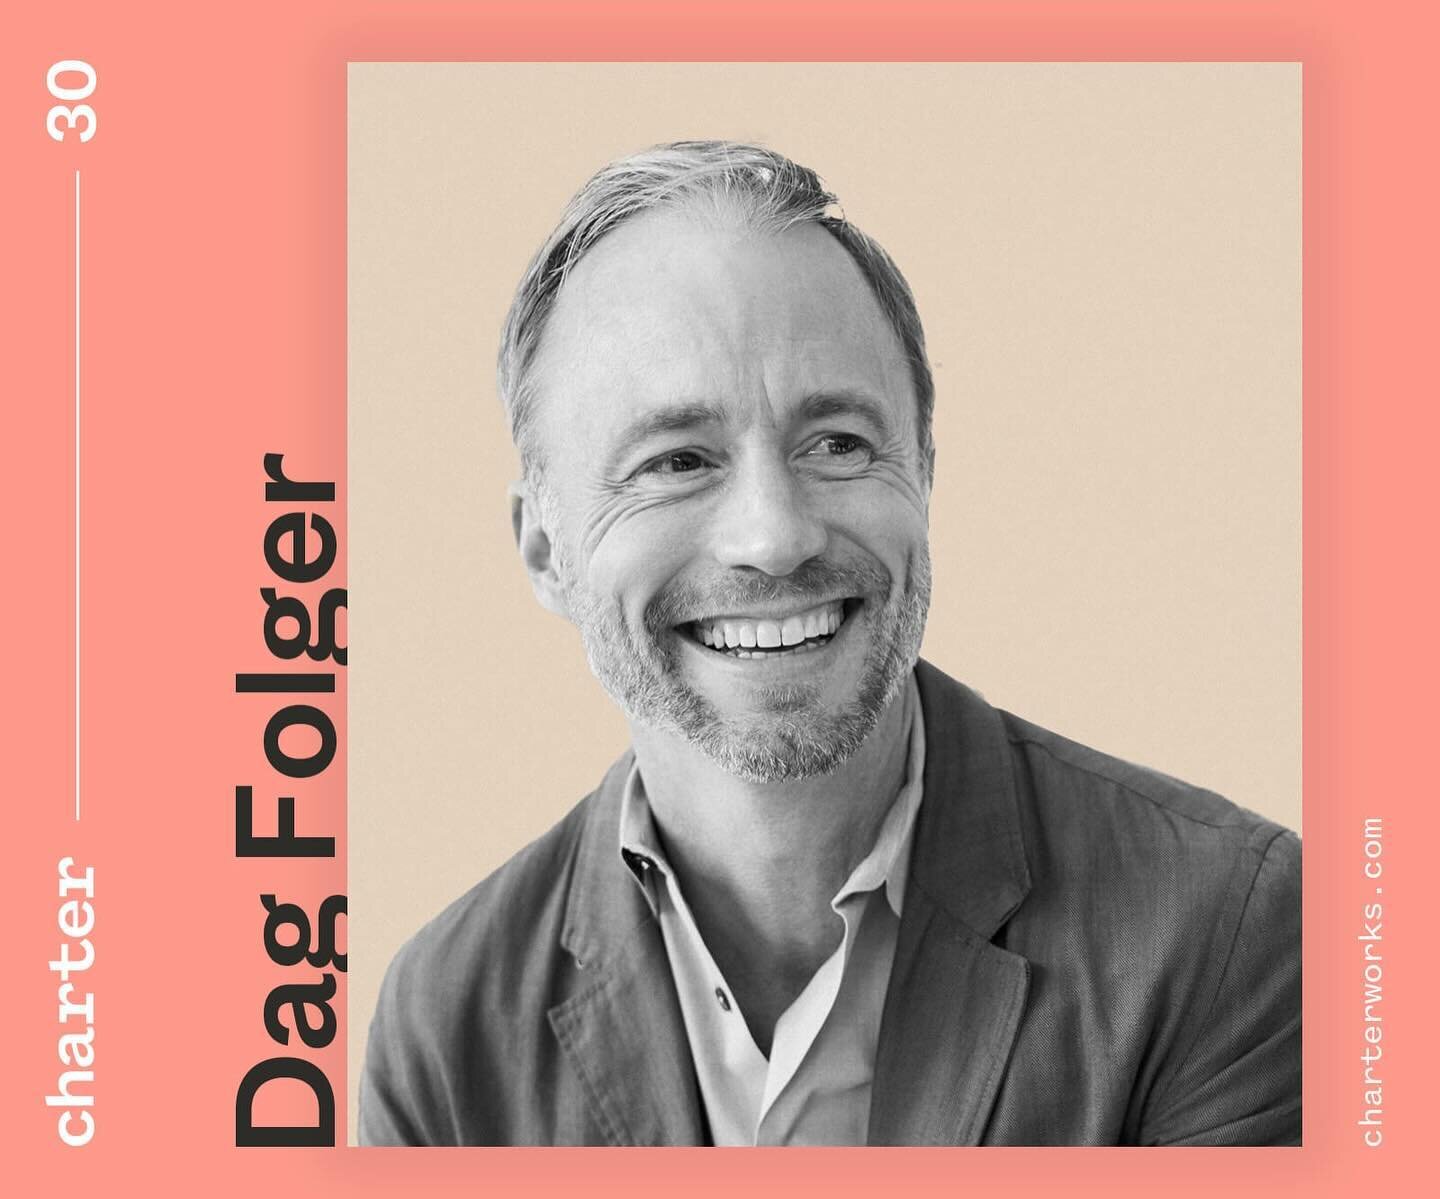 We are proud to announce that our Co-Founder Dag Folger has been included in the inaugural @charter.works 30 list &ndash; a roundup of thinkers, leaders, and innovators who are shaping the future of work through research or practice. 

In his intervi